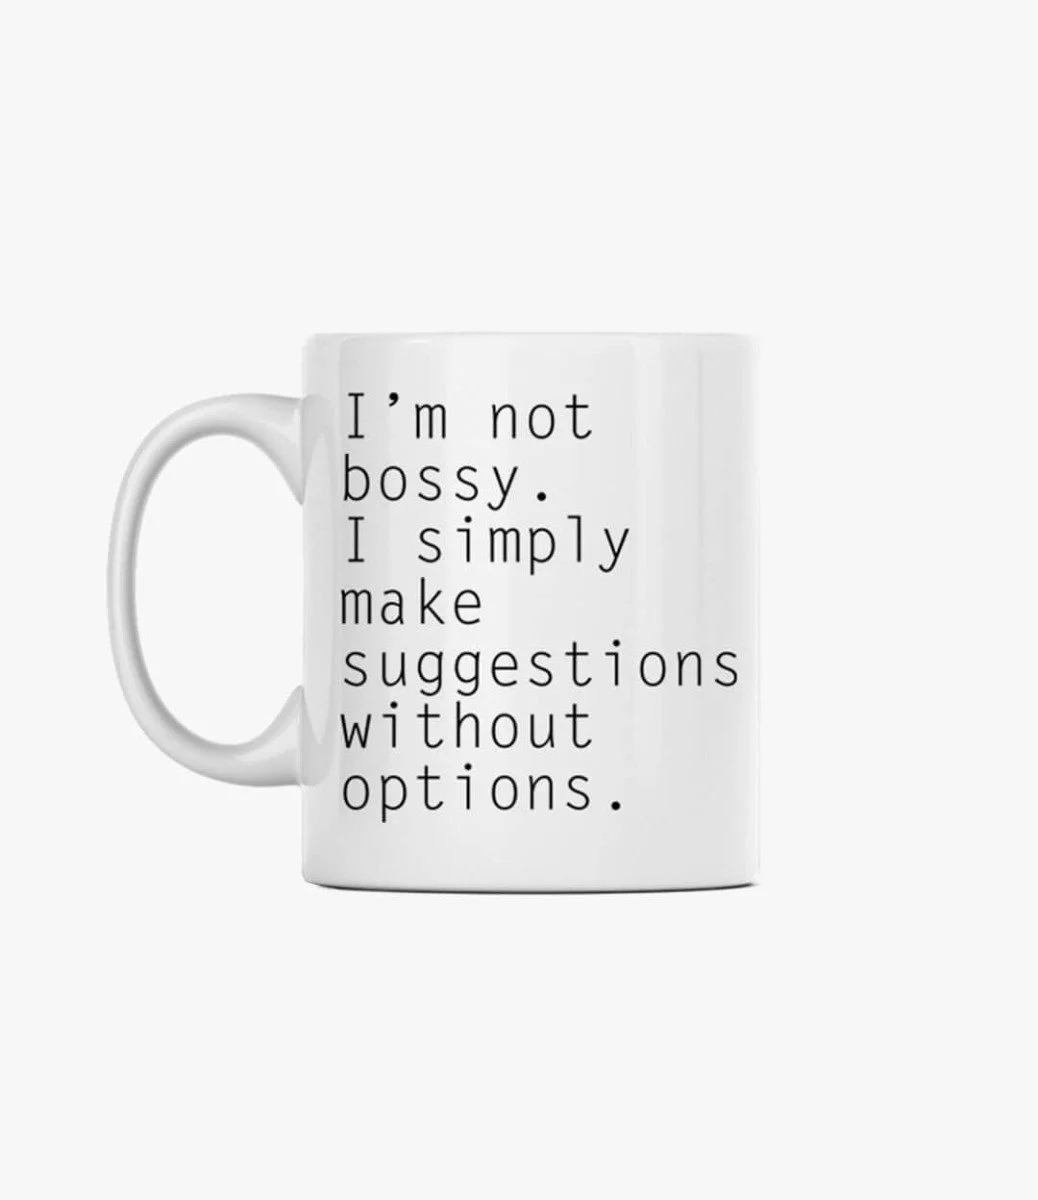 I'm not bossy. I simply make suggestions without options Mug